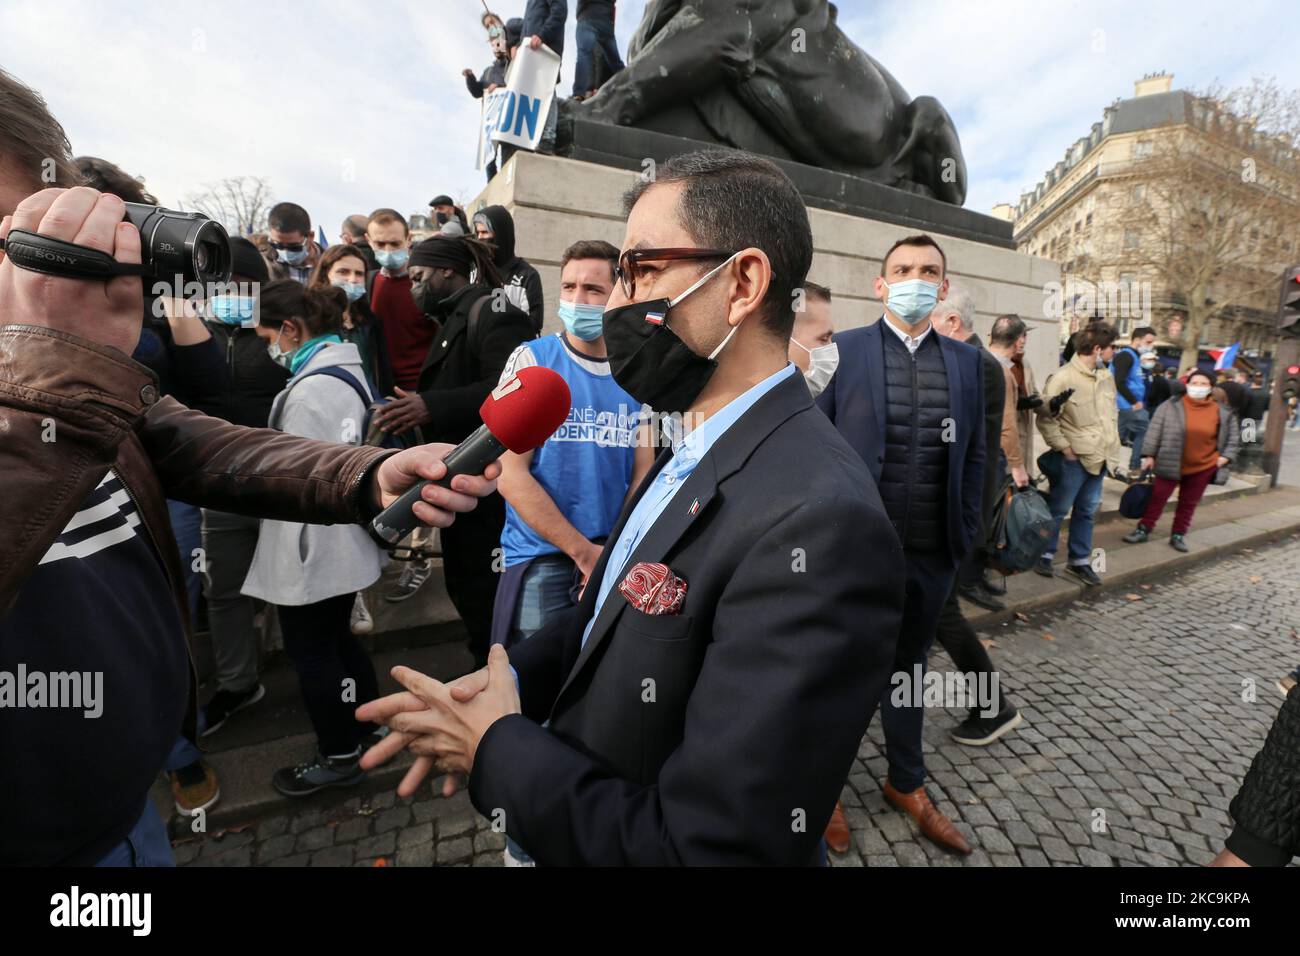 Member of far-right Rassemblement National's (RN) Jean Messiha (C) speaks with the press during a protest against the far right Generation Identitaire group's potential dissolution in Place Denfert Rochereau, in Paris on February 20, 2021. The dissolution of Generation identitaire was evoked for the first time on January 26, 2021 by Interior Minister, as a reaction to the group's recent anti-migrant operation in the Pyrenees, which led to a preliminary investigation for provocation to racial hatred. (Photo by Michel Stoupak/NurPhoto) Stock Photo